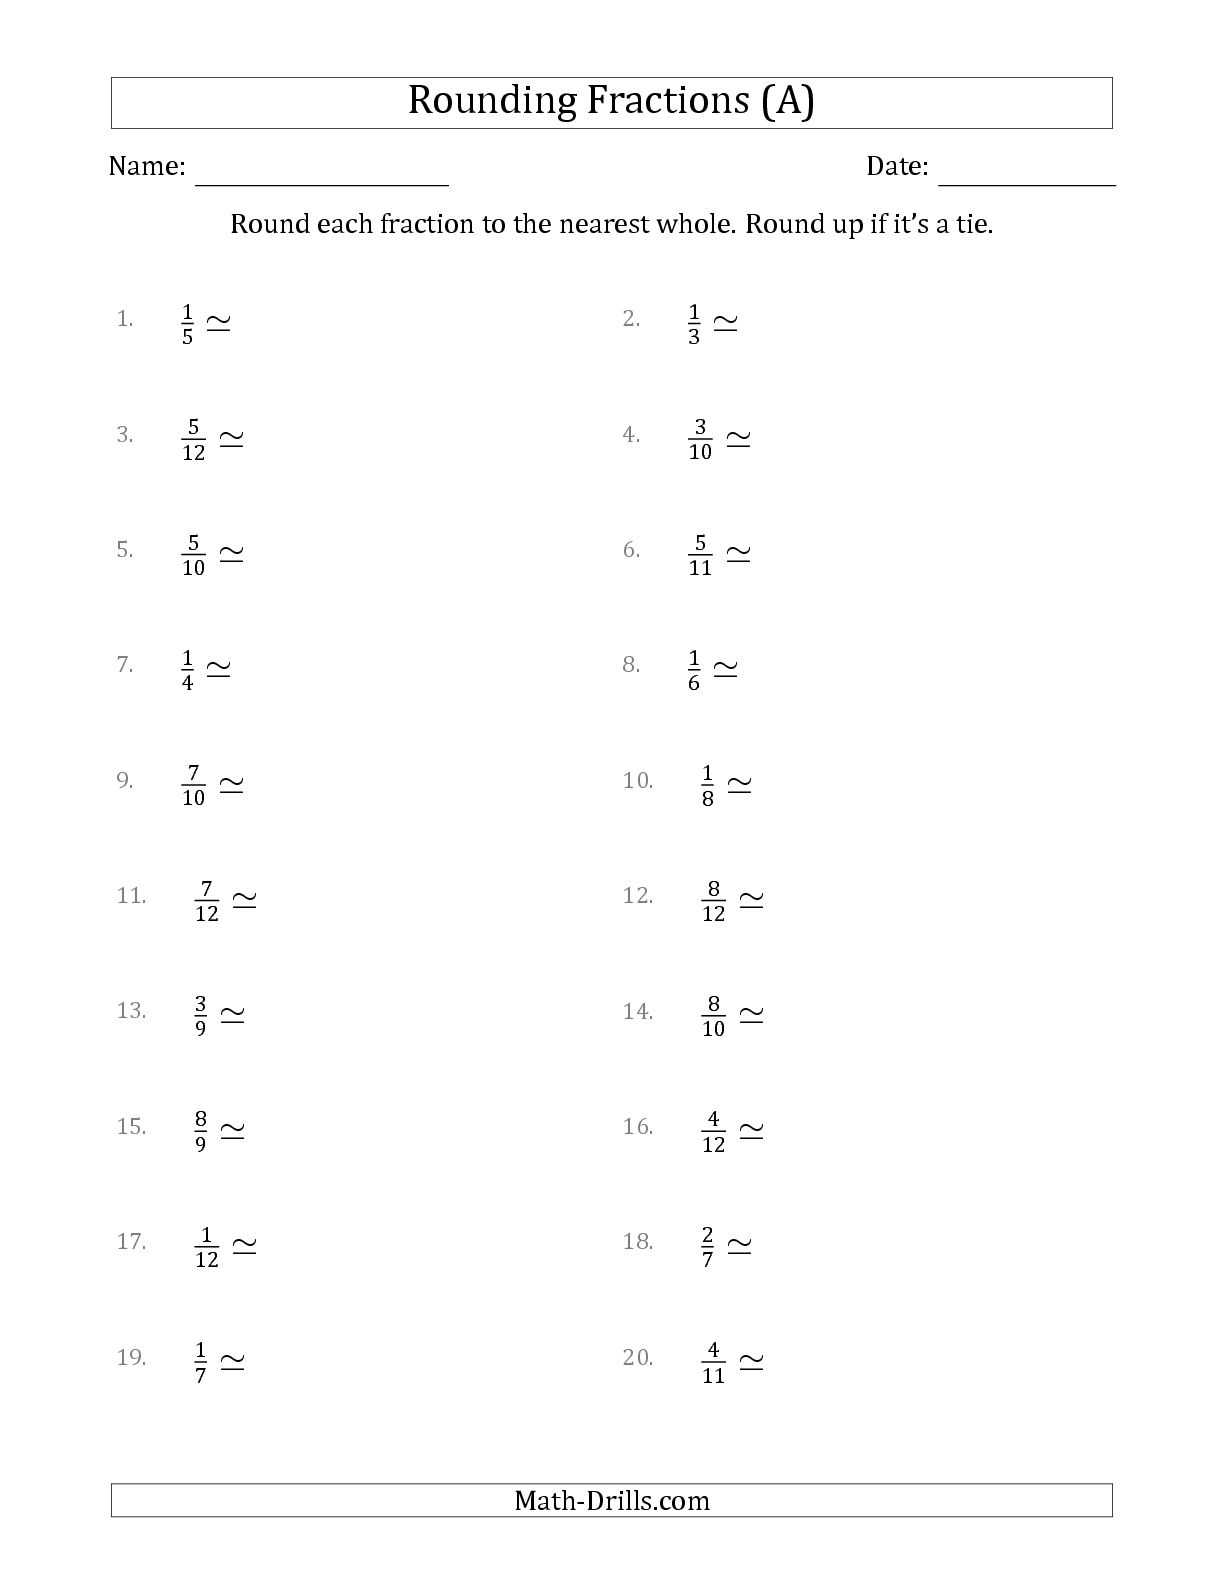 Fractions On A Number Line Worksheet Pdf Along with Rounding Fractions to the Nearest whole A Of Numbers Worksheets Year